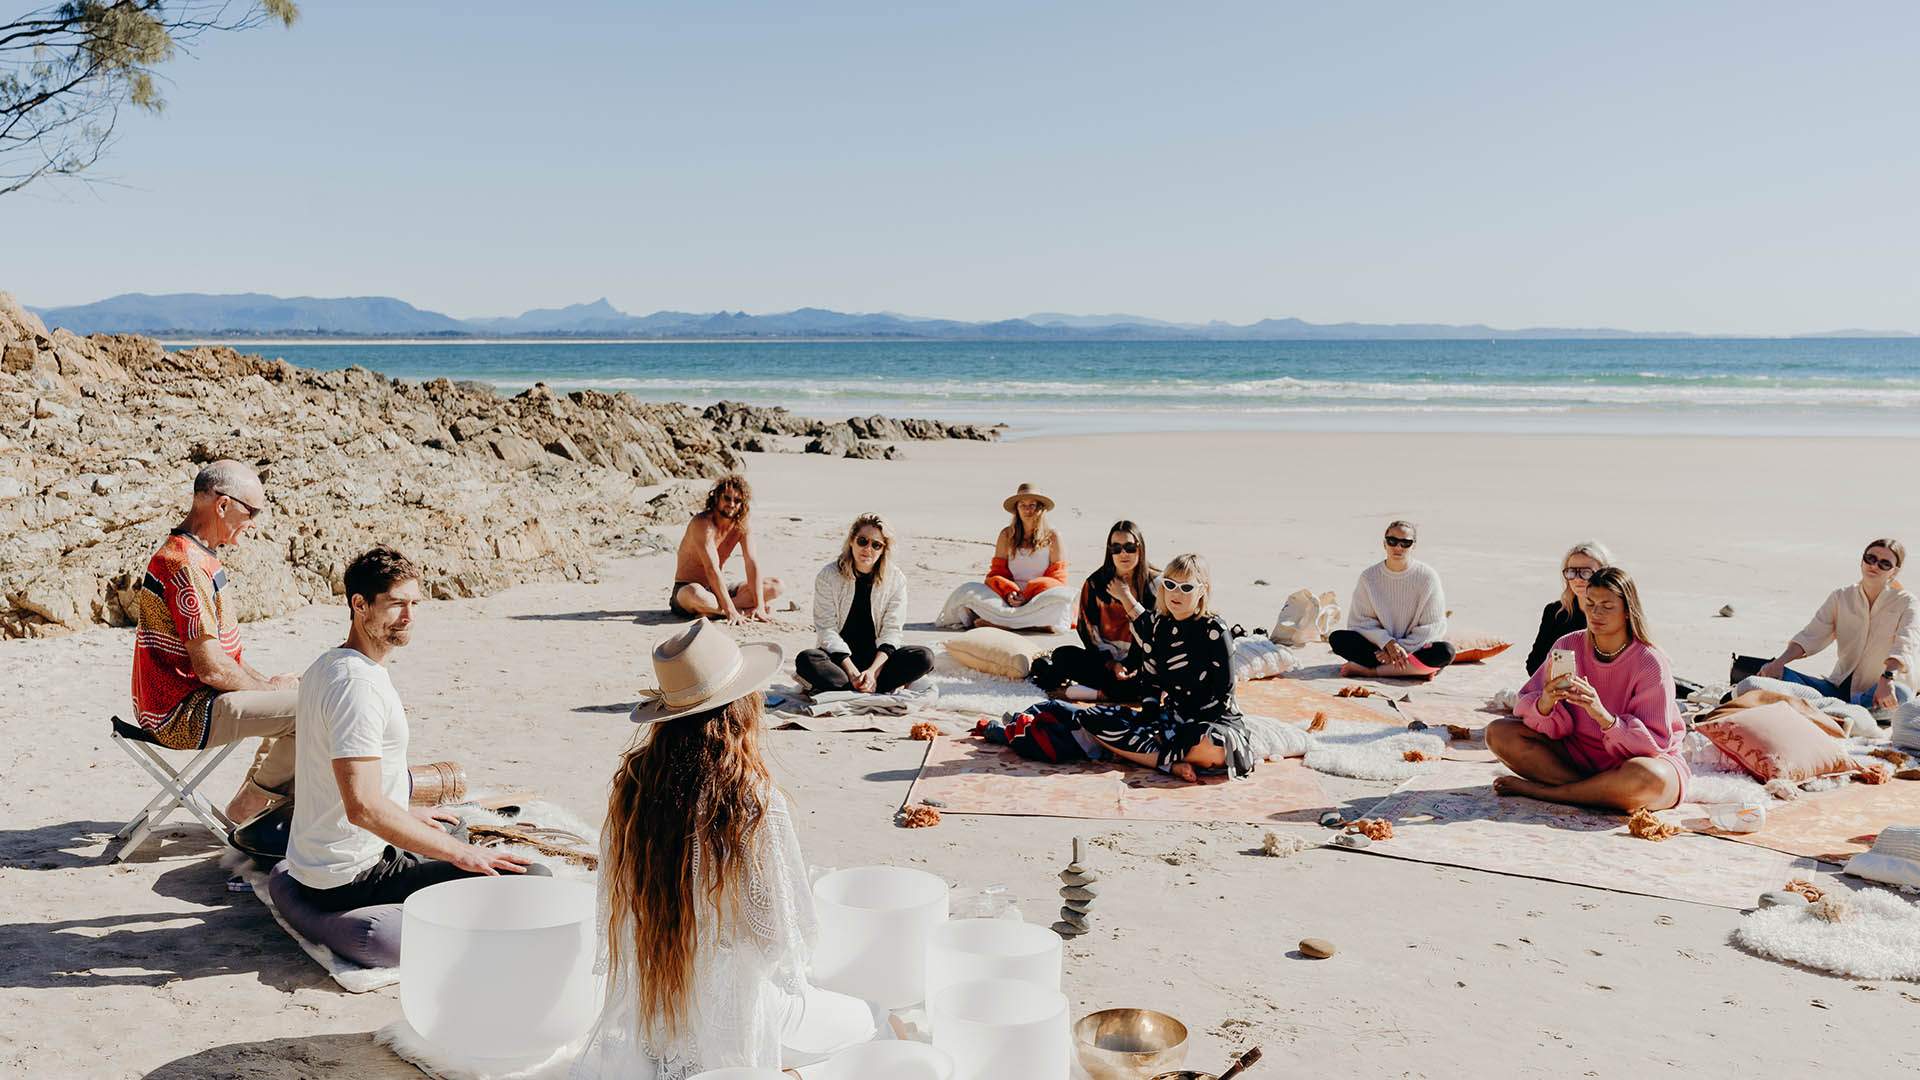 Brand-New Spring Food and Culture Festival Caper Byron Bay Has Unveiled Its Four-Day Program